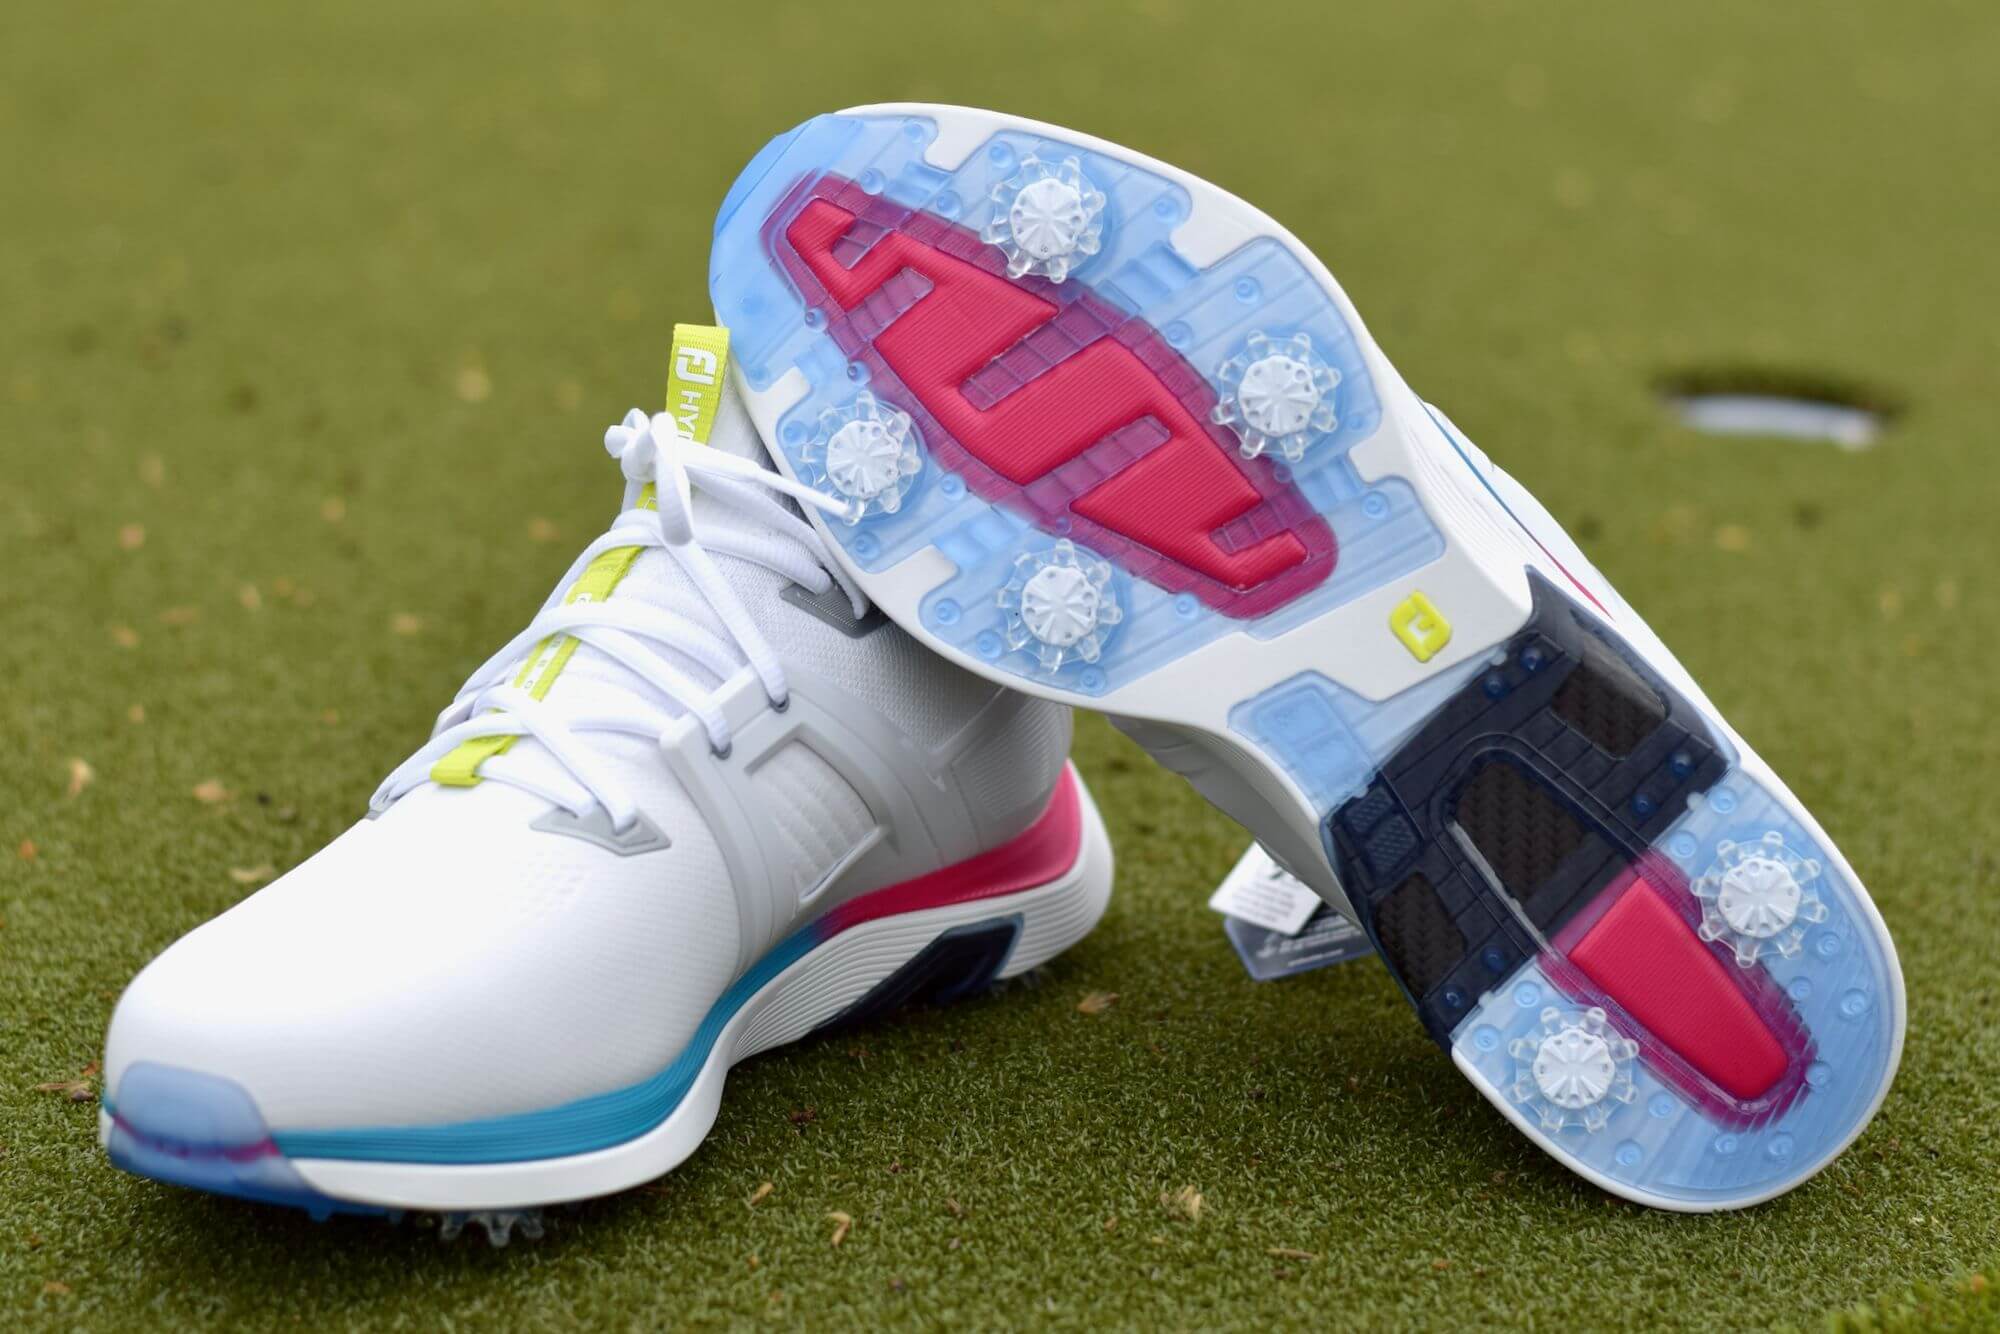 Photo: bets golf shoes